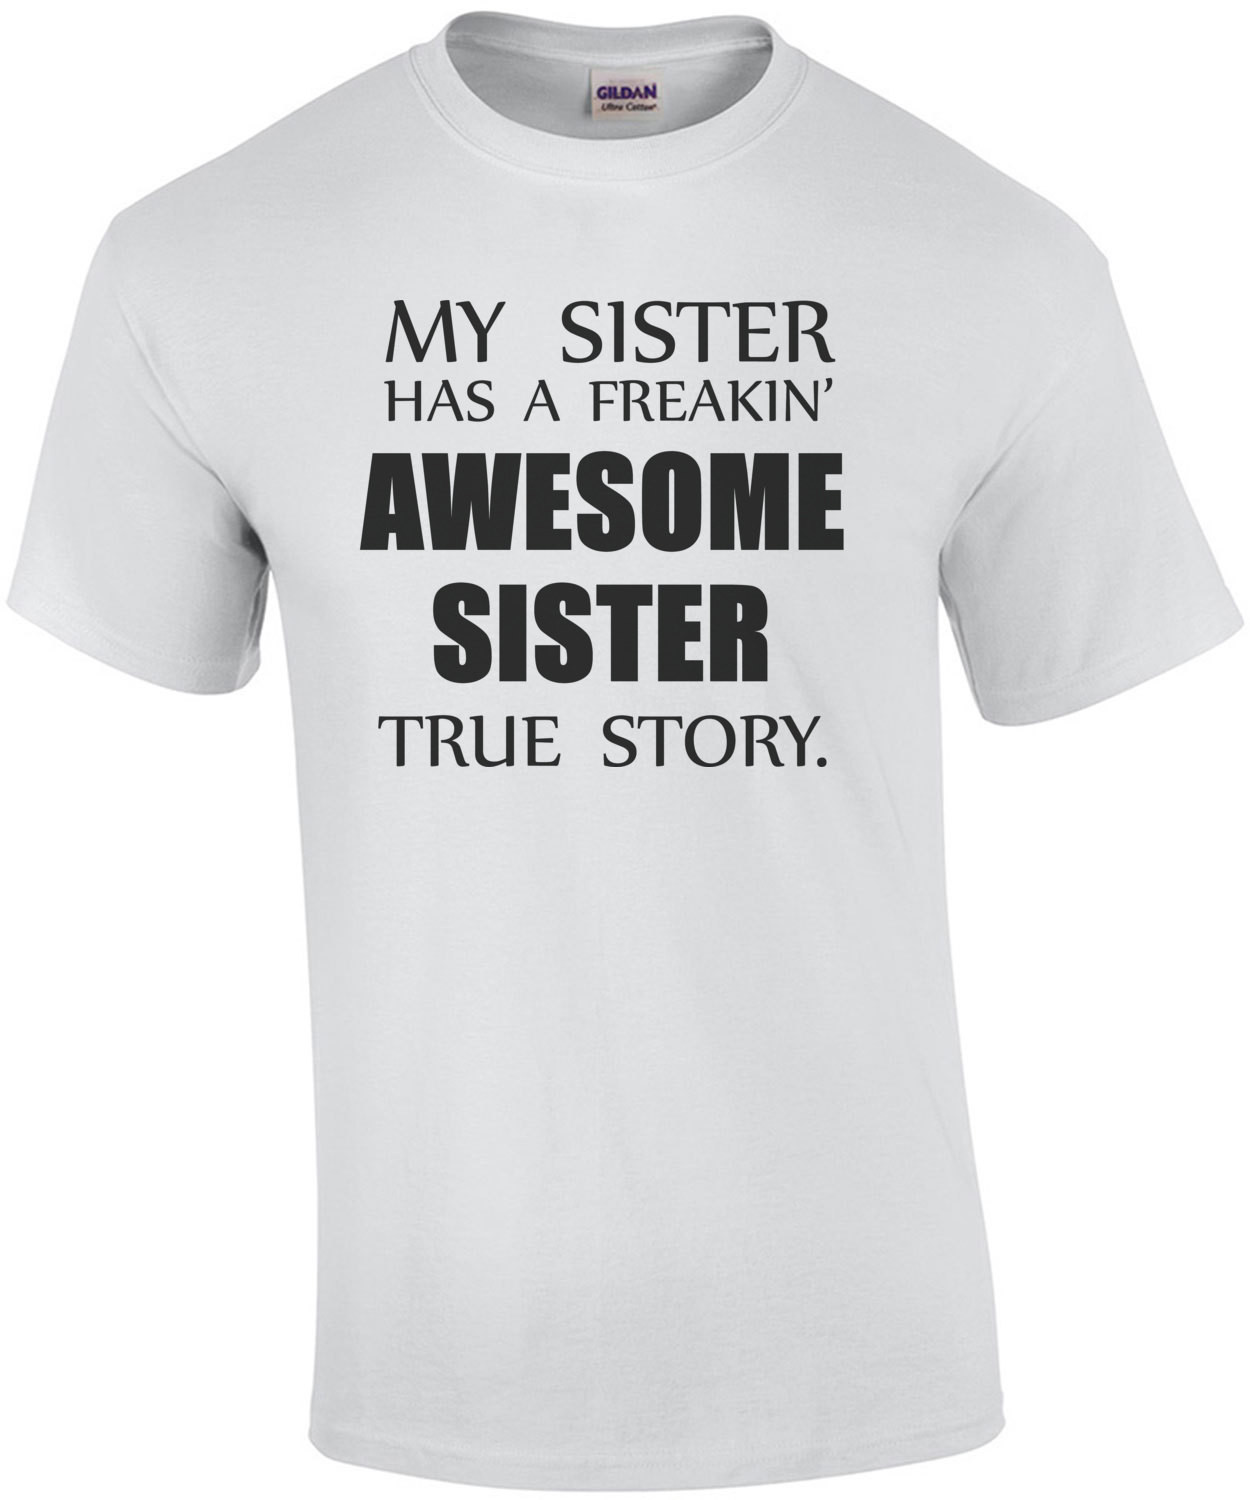 My sister has a freakin' awesome sister true story t-shirt